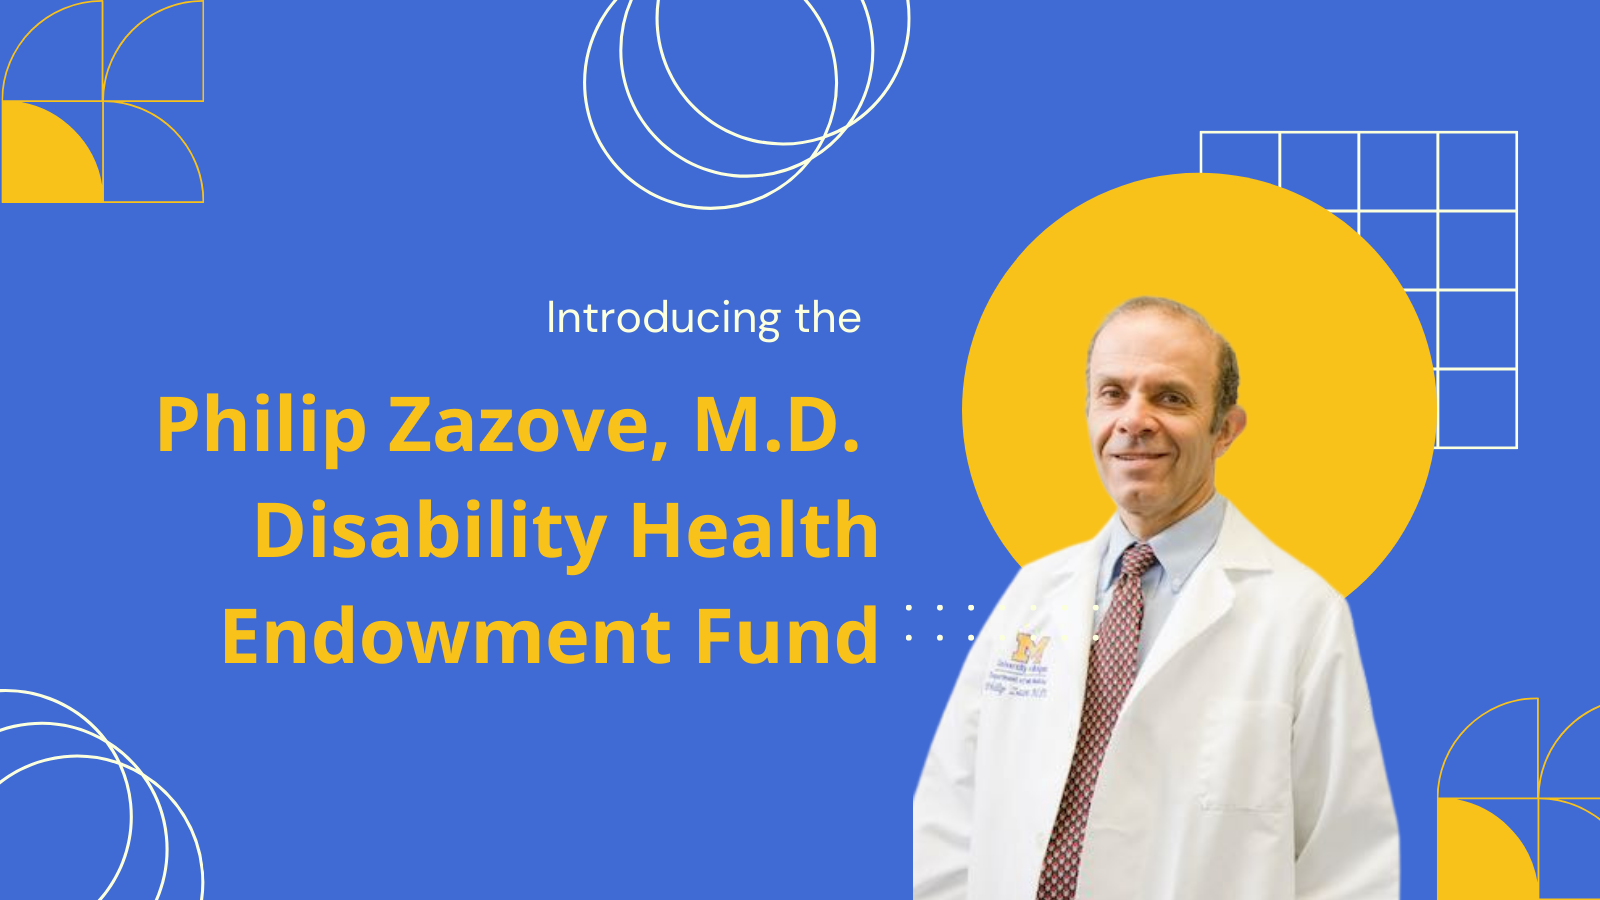 Blue background with yellow and white geometric shapes and an image of Philip Zazove wearing a medical white coat and a collared shirt and tie. Image reads: Introducing the Philip Zazove, MD Disability Health Endowment Fund 